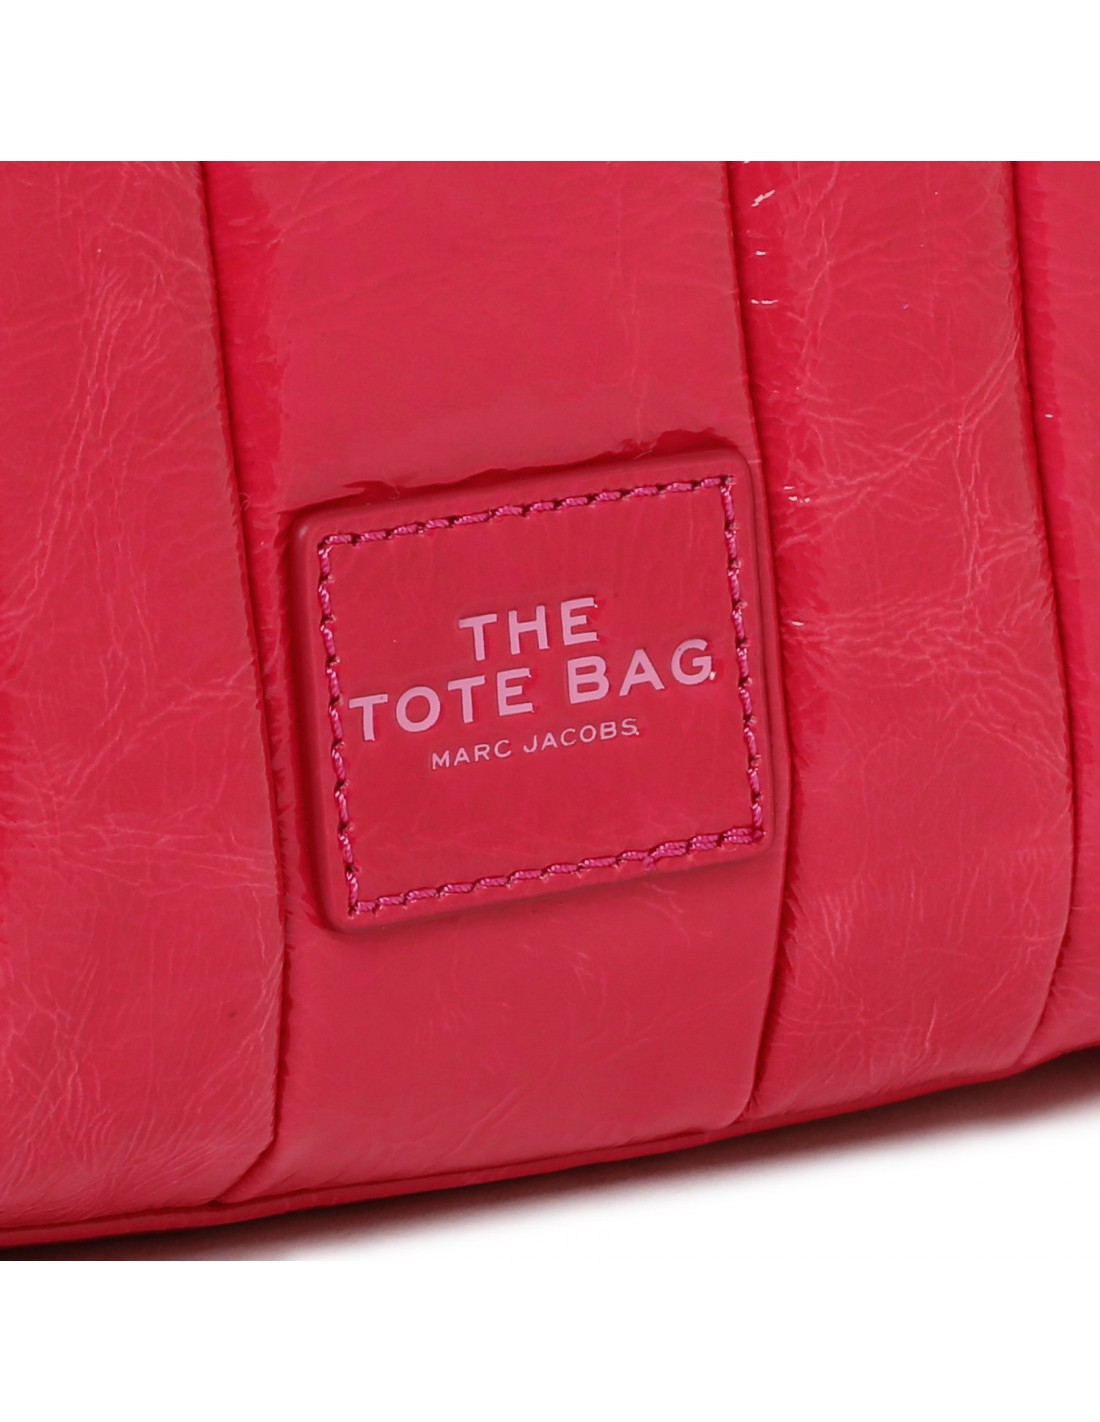 The Shiny Crinkle red micro tote